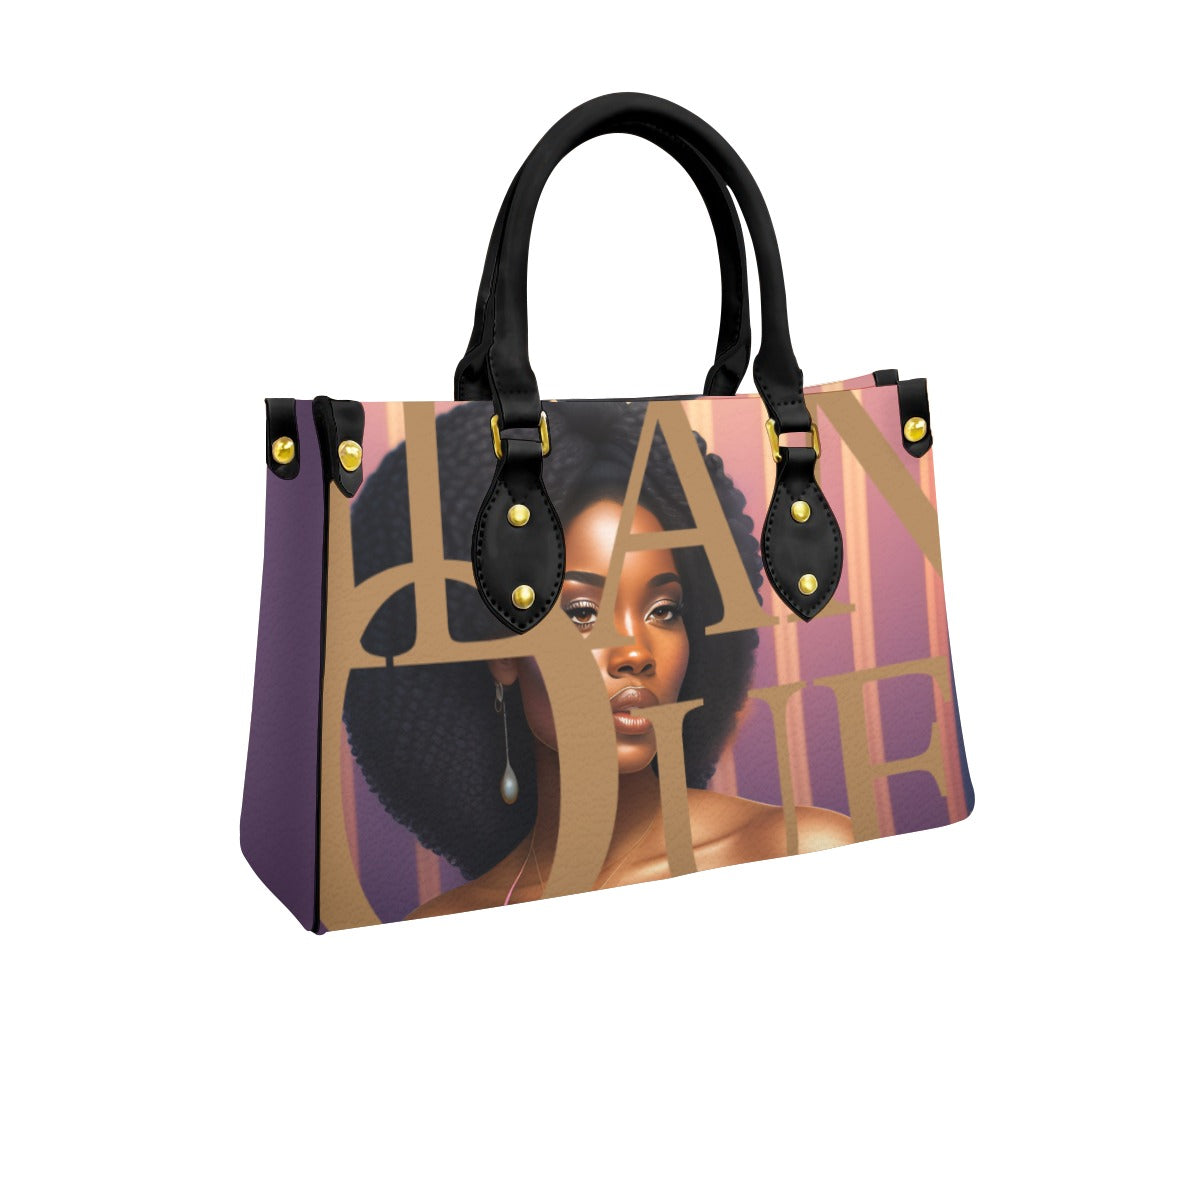 Angela by Melanin Queen - Women's Tote Bag With Black Handle